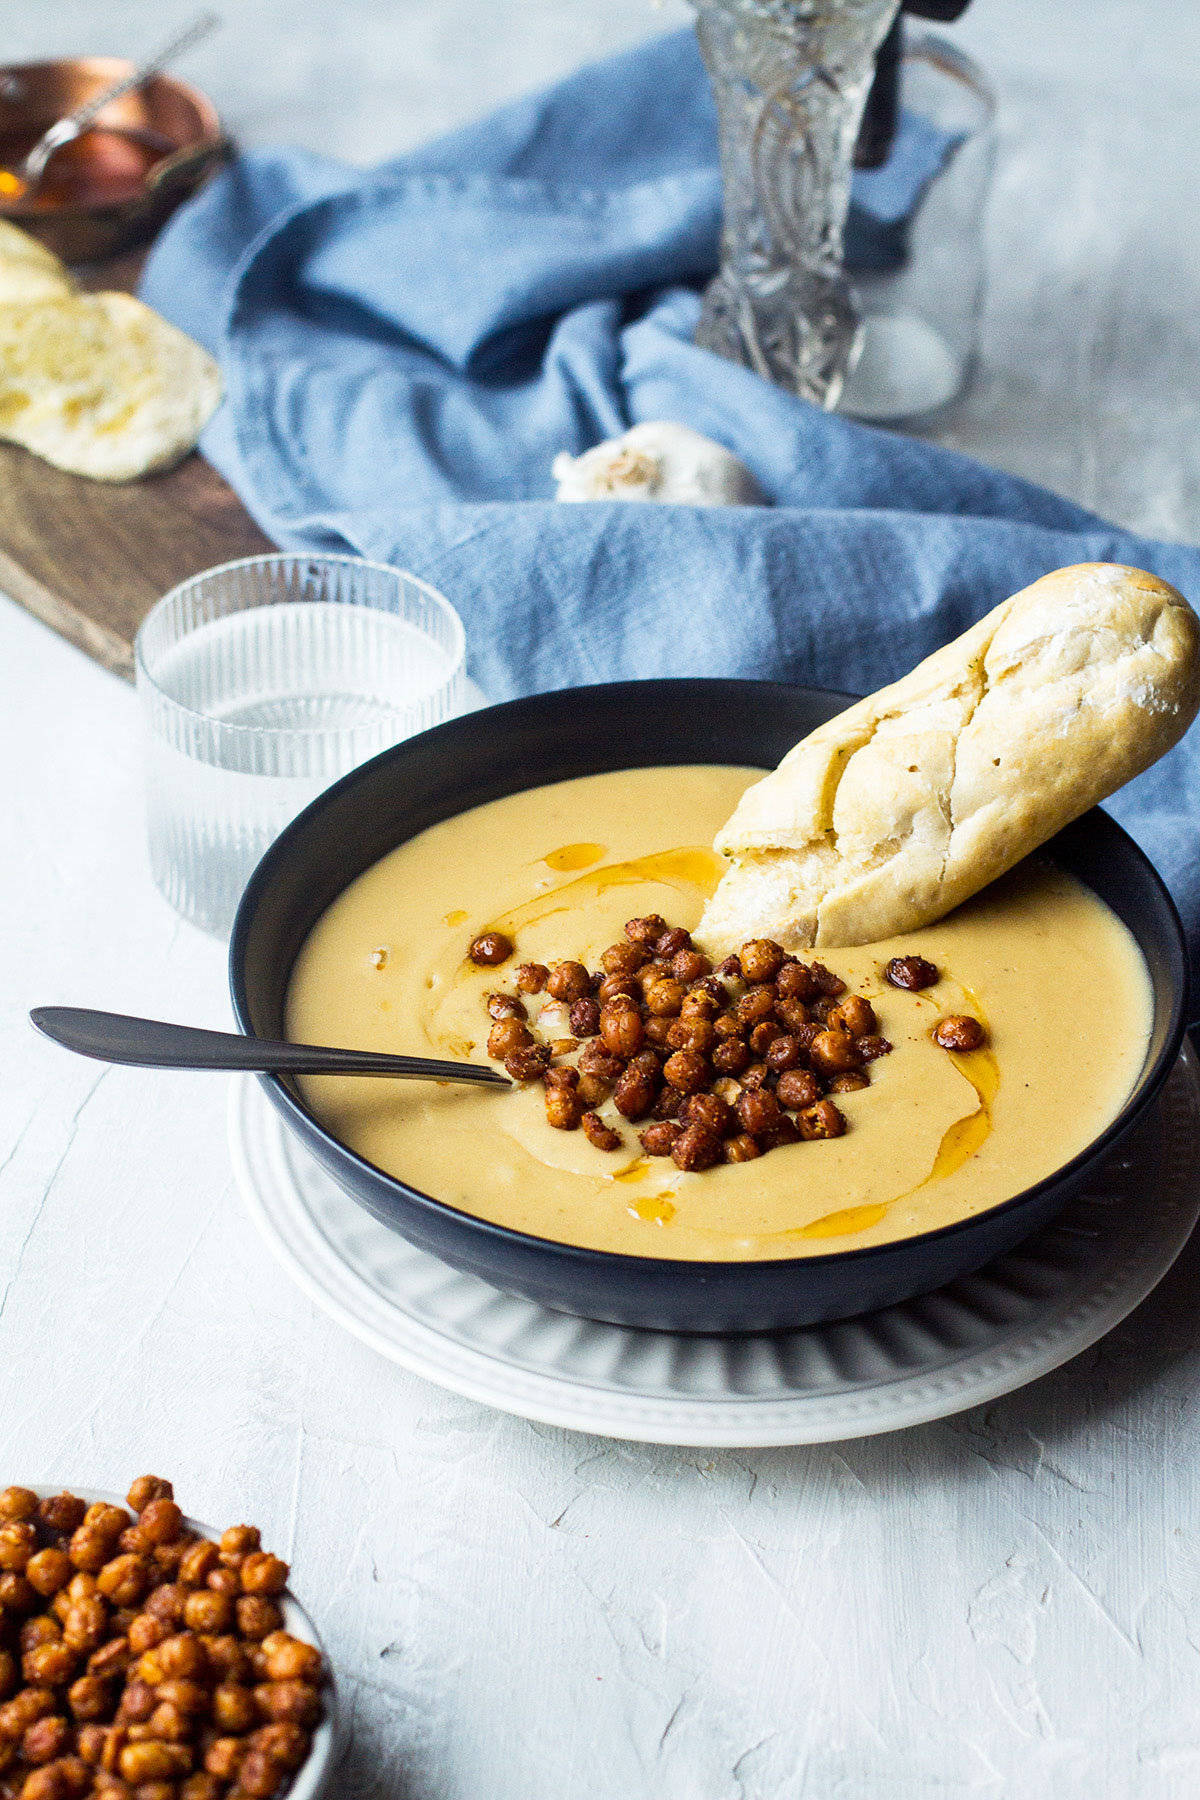 Chickpea soup in a dark bowl, with garlic bread and roasted chickpeas.